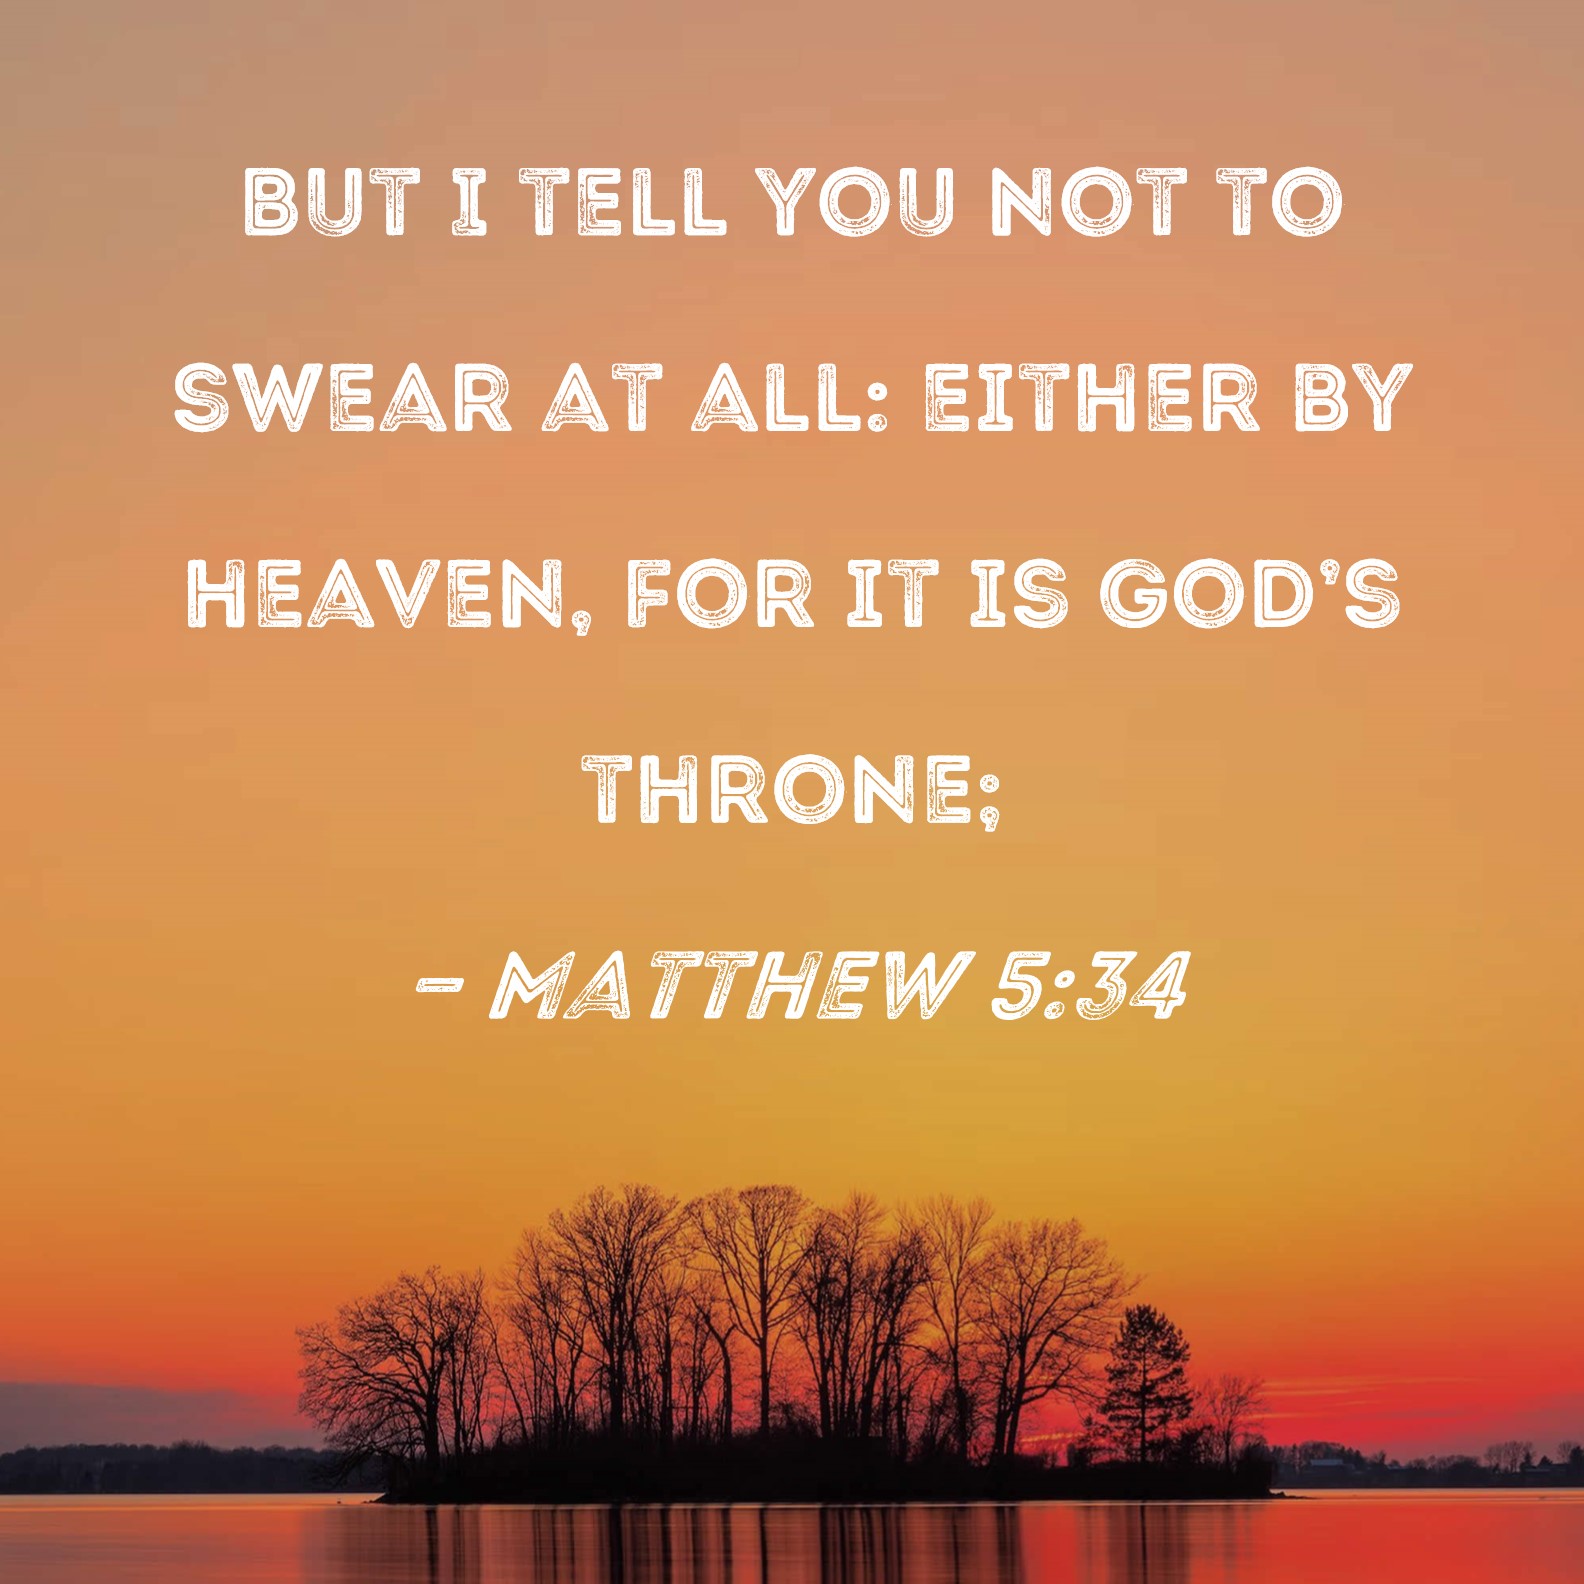 Matthew 5:34 But I tell you not to swear at all: either by heaven for